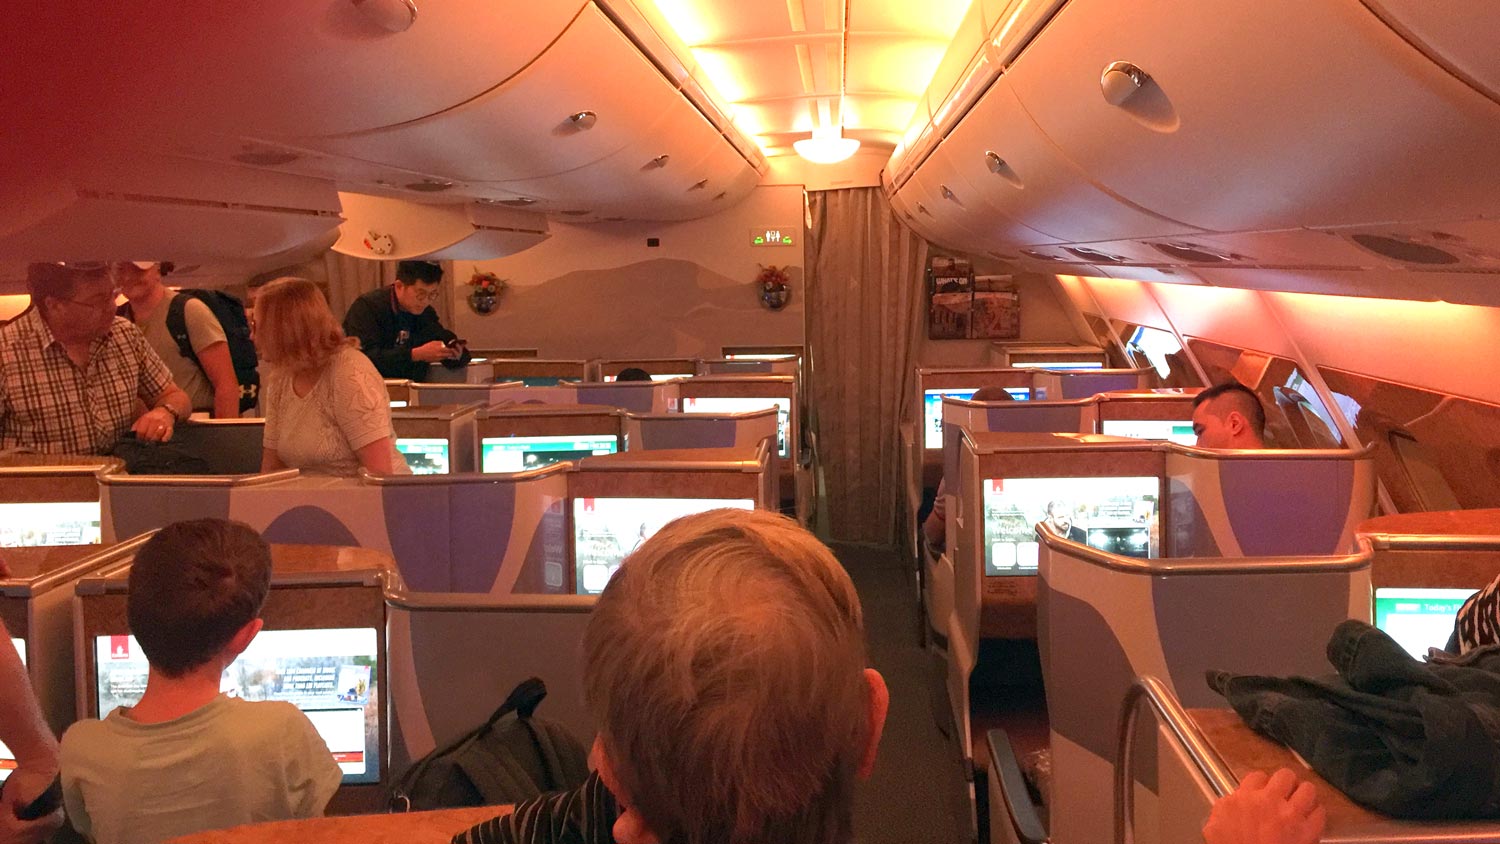 people inside a plane with people sitting in chairs